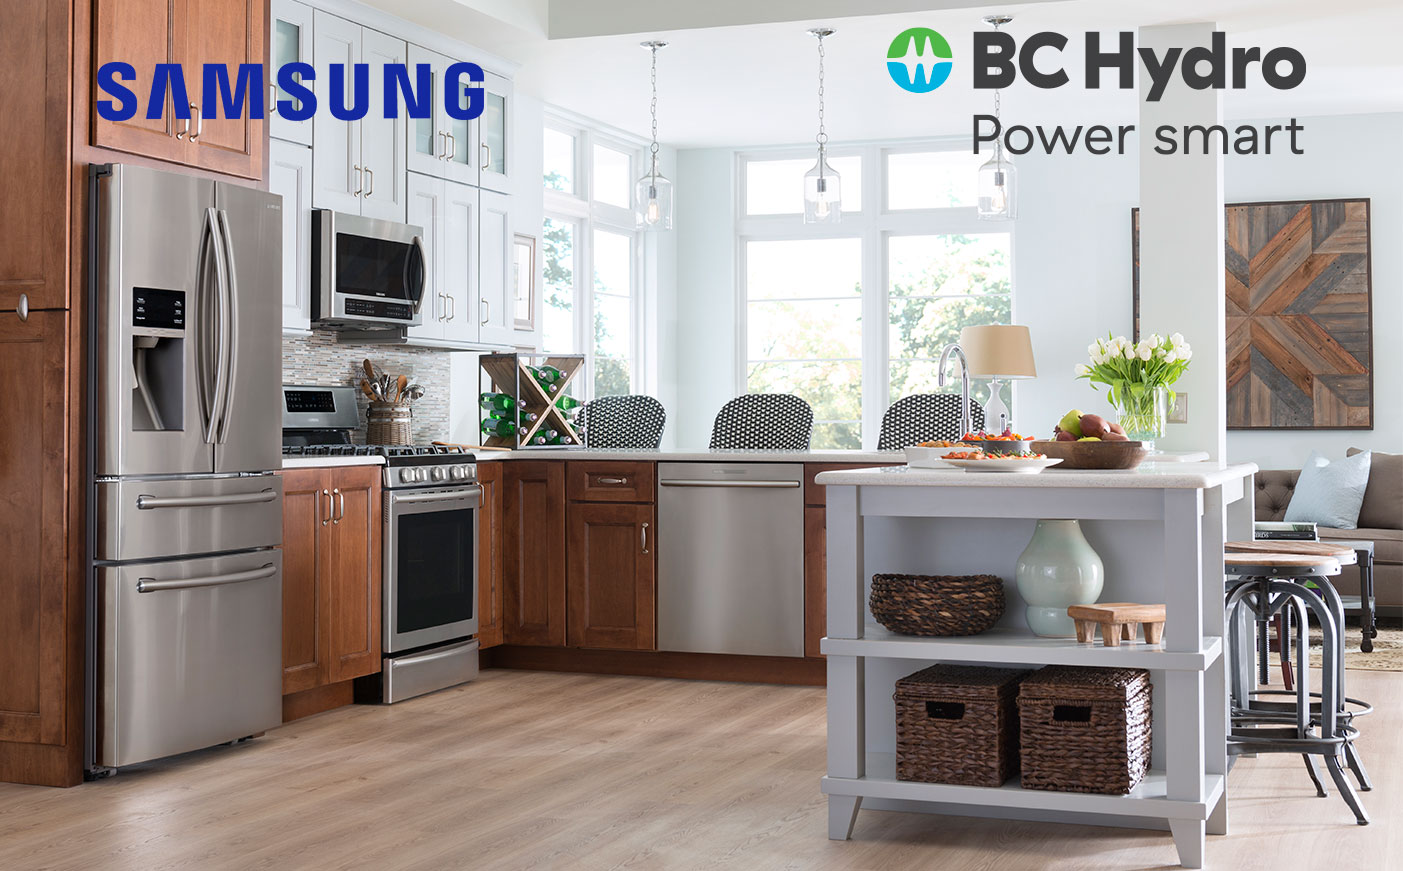 bc-hydro-rebates-2020-bosch-3x-bc-hydro-rebate-promotion-coast-appliances-as-of-october-1